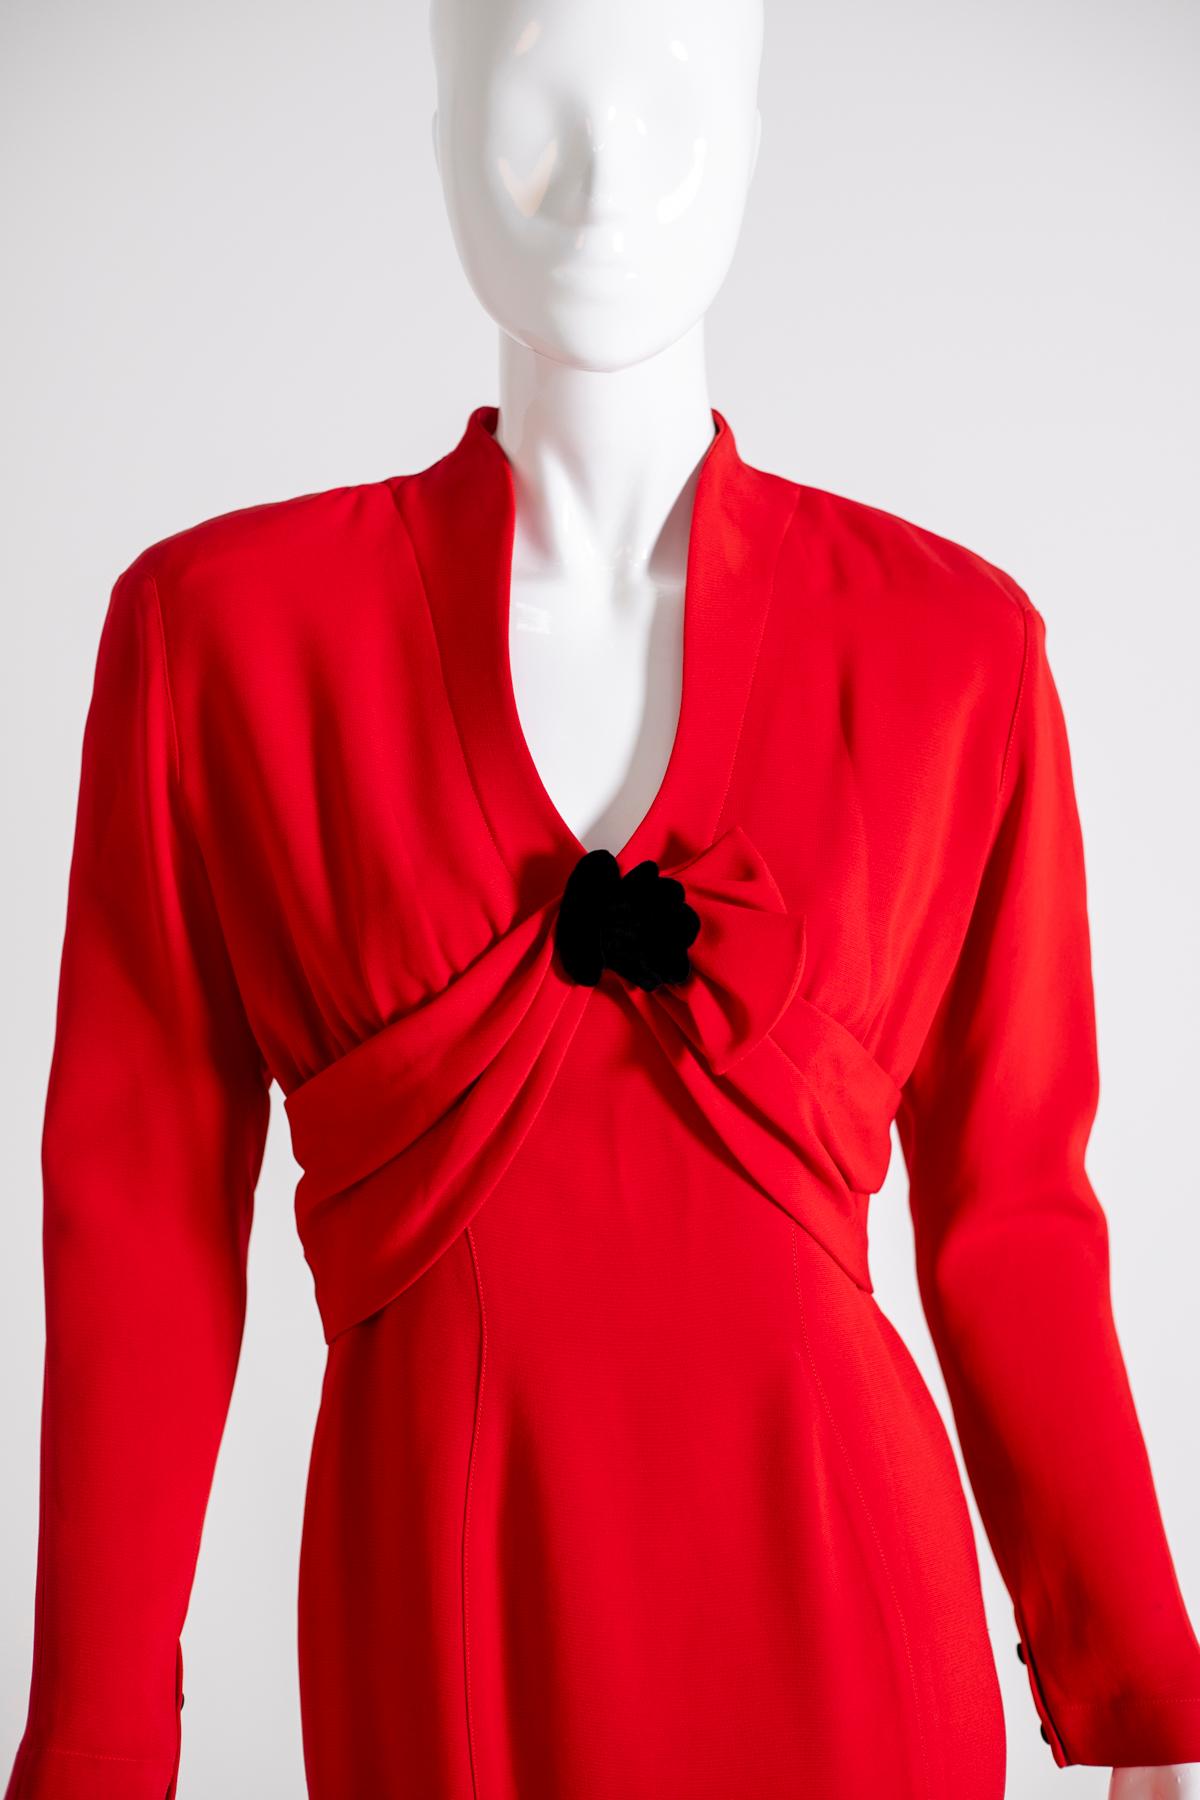 Thierry Mugler Paris Vintage 80s Red Cocktail Dress For Sale at 